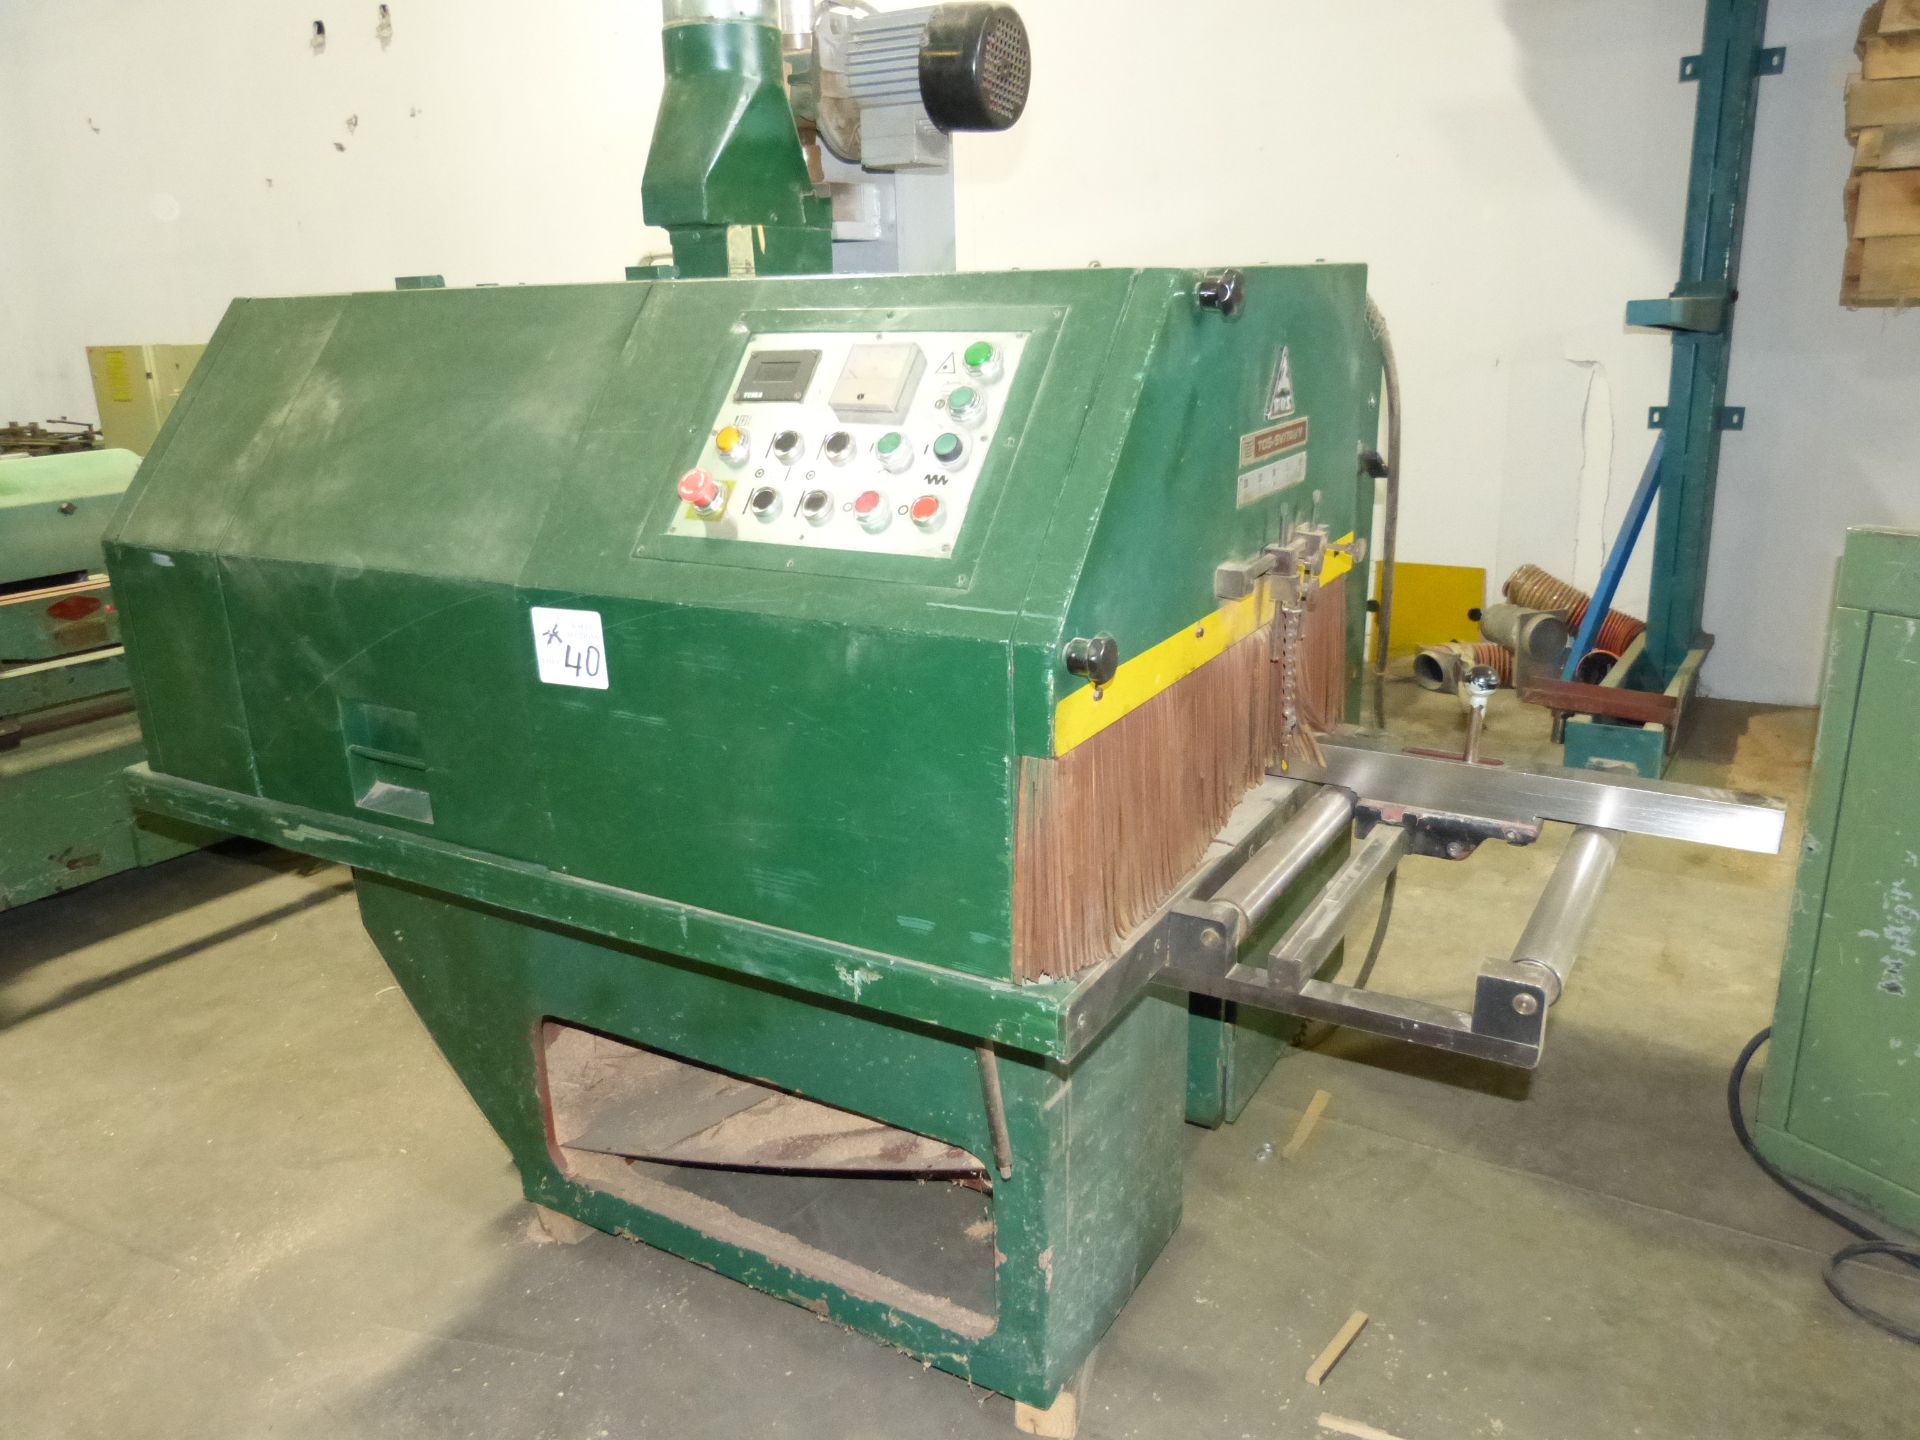 TOS MODEL SVITAVY CHAIN FEED MULTI RIP SAW 600 VOLTS